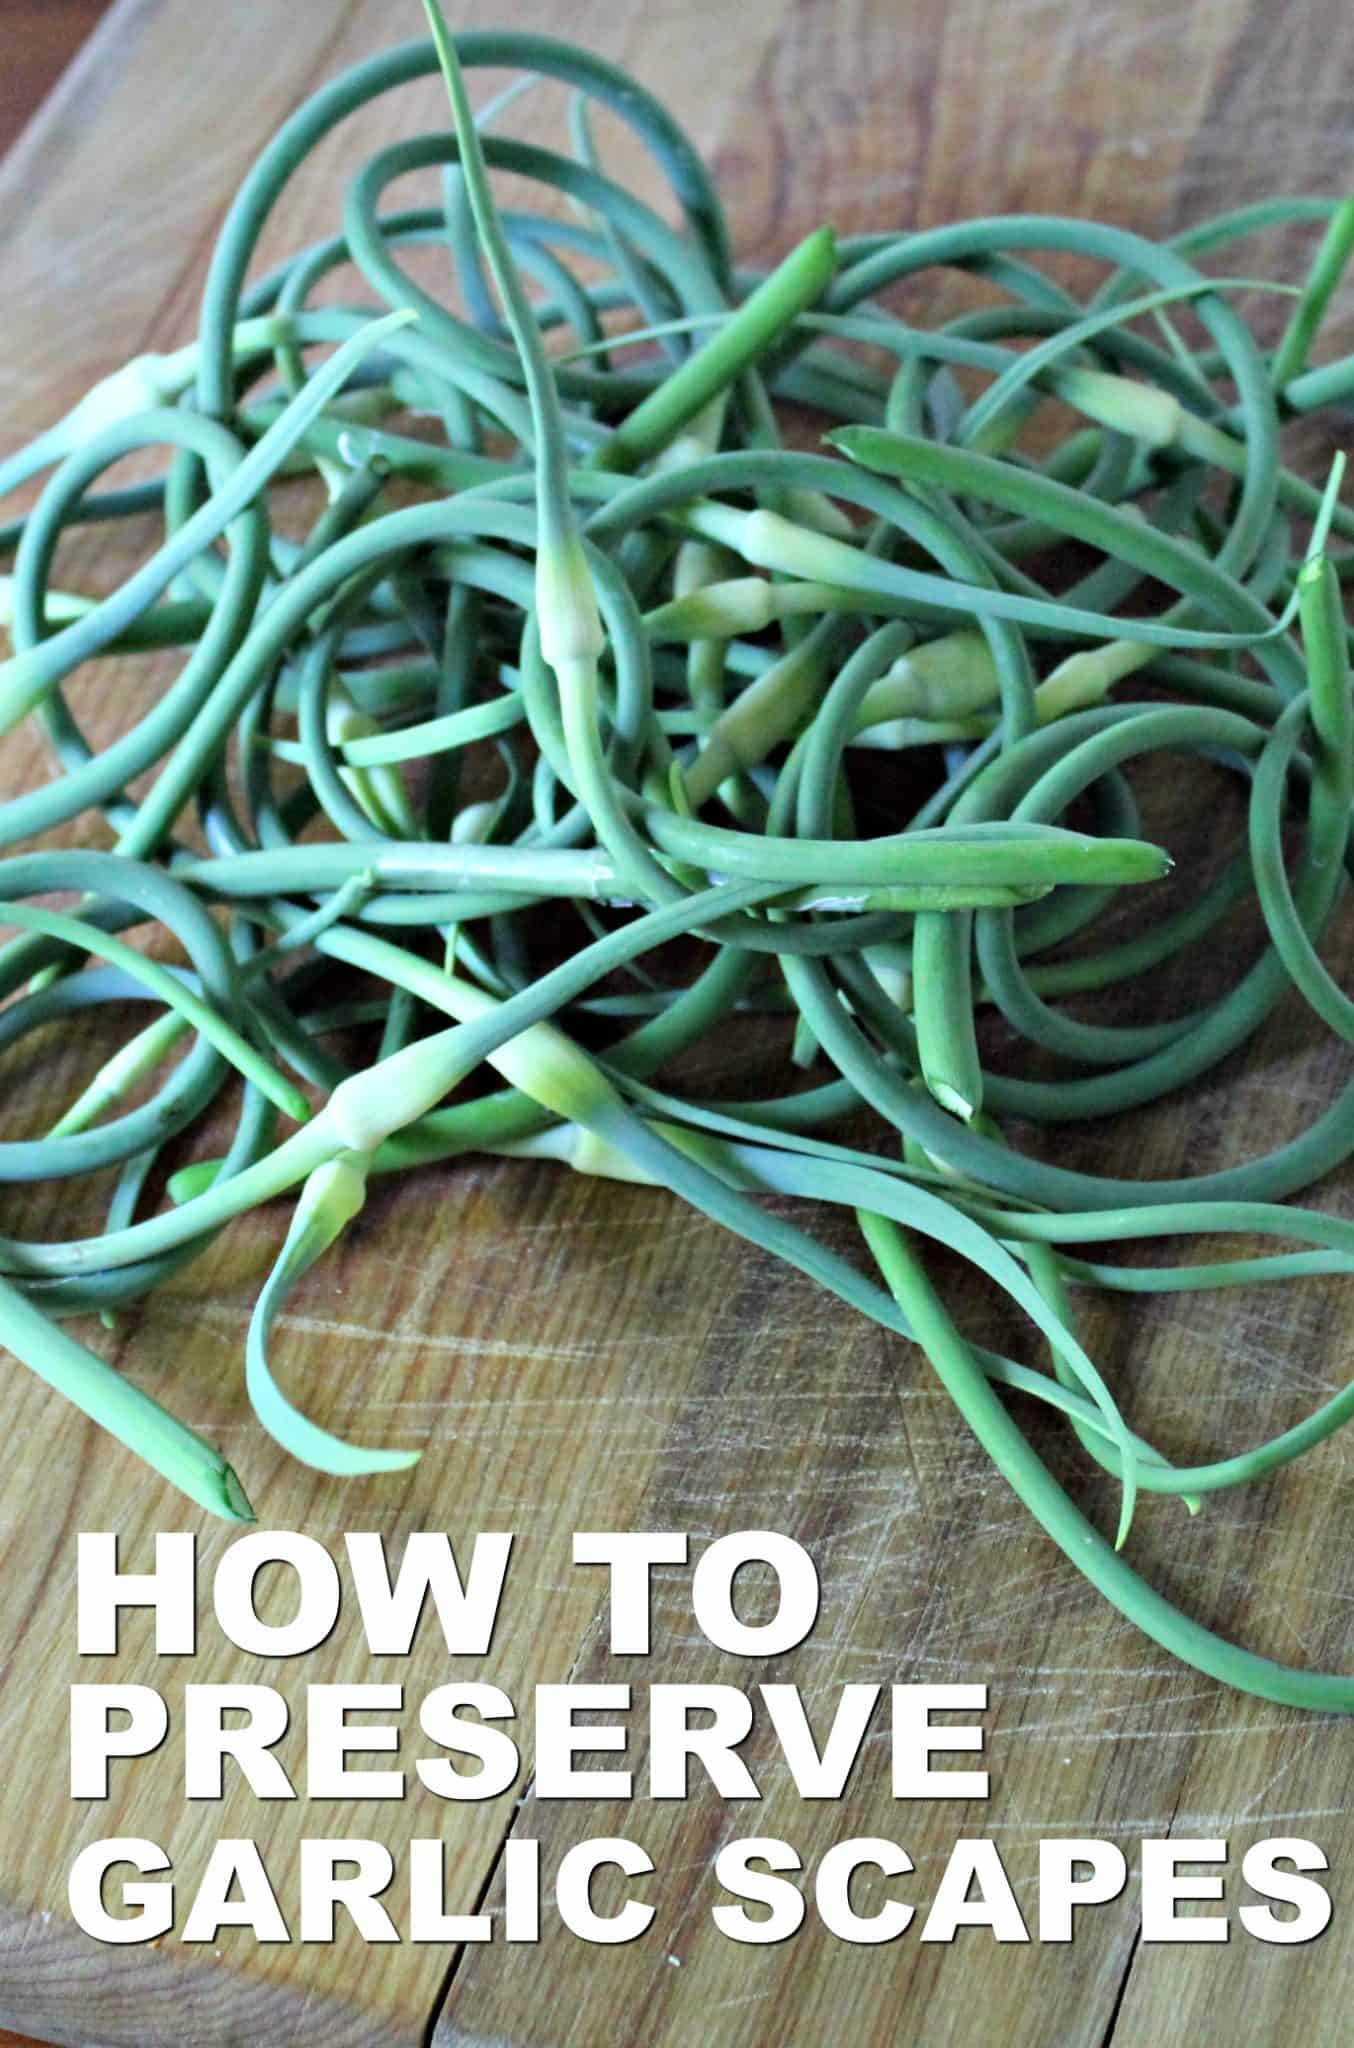 How to preserve garlic scapes